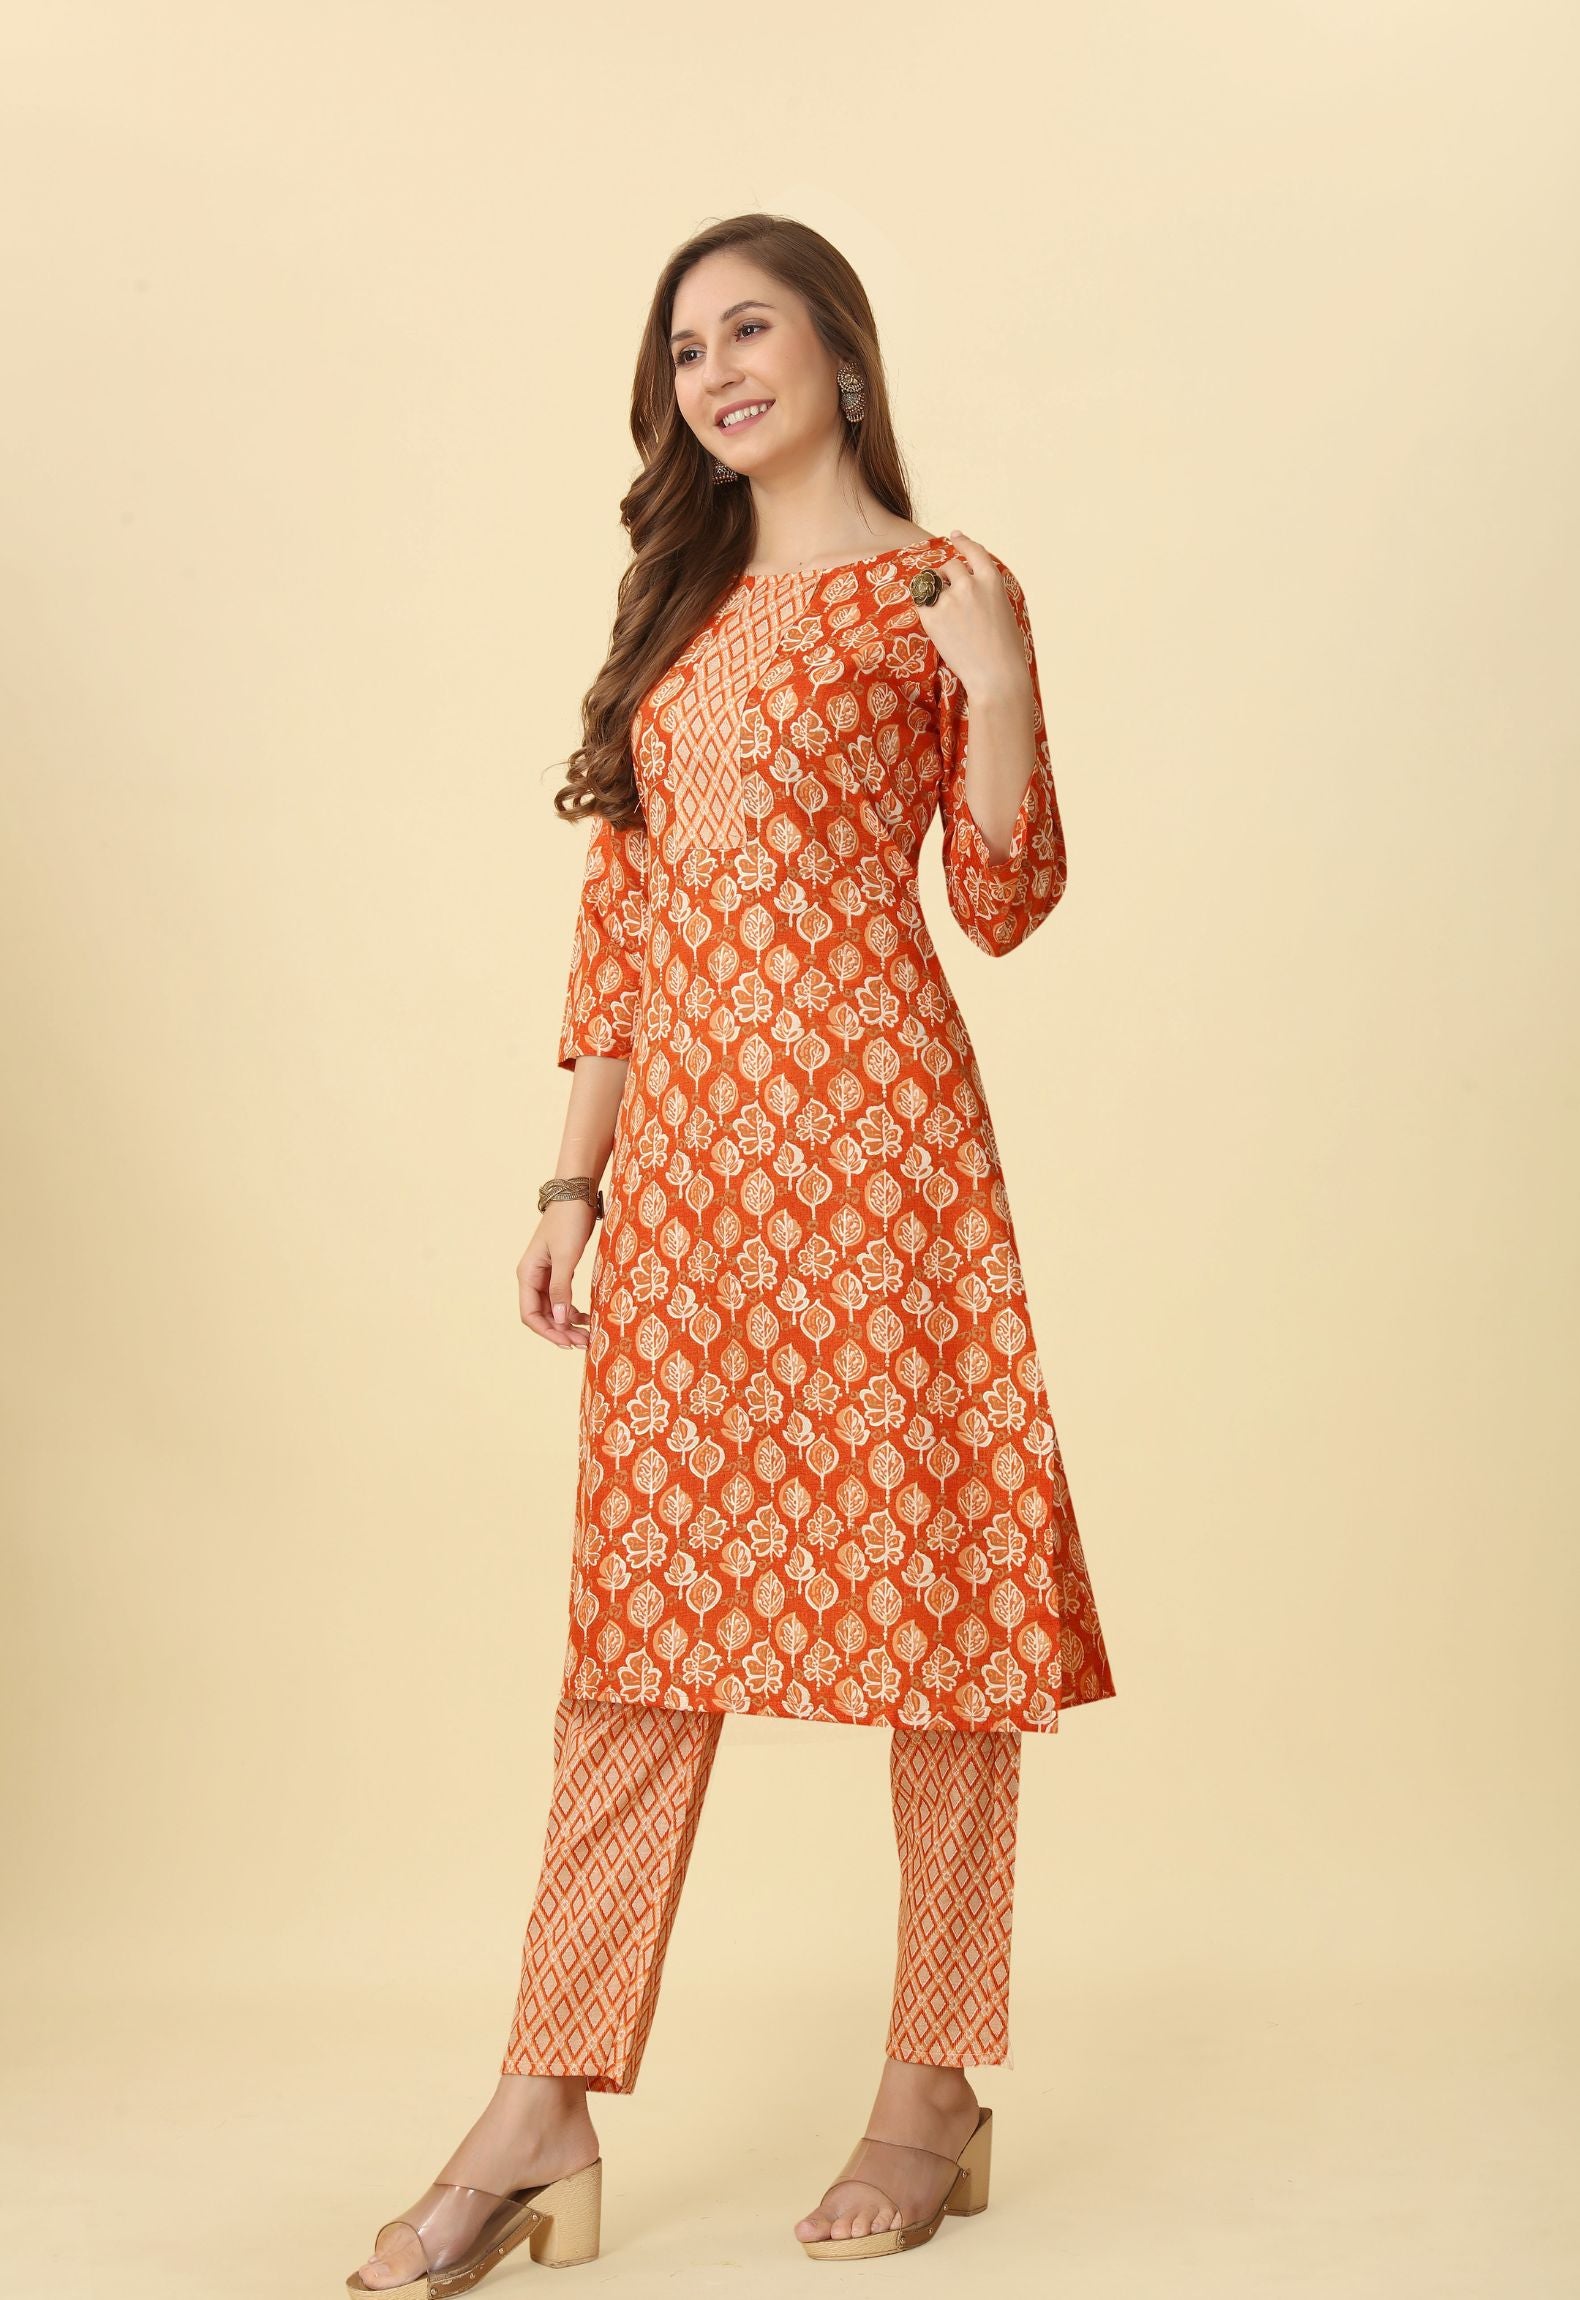 Buy Kurti Online | Buy Kurti for Woman with Latest Design at best prices